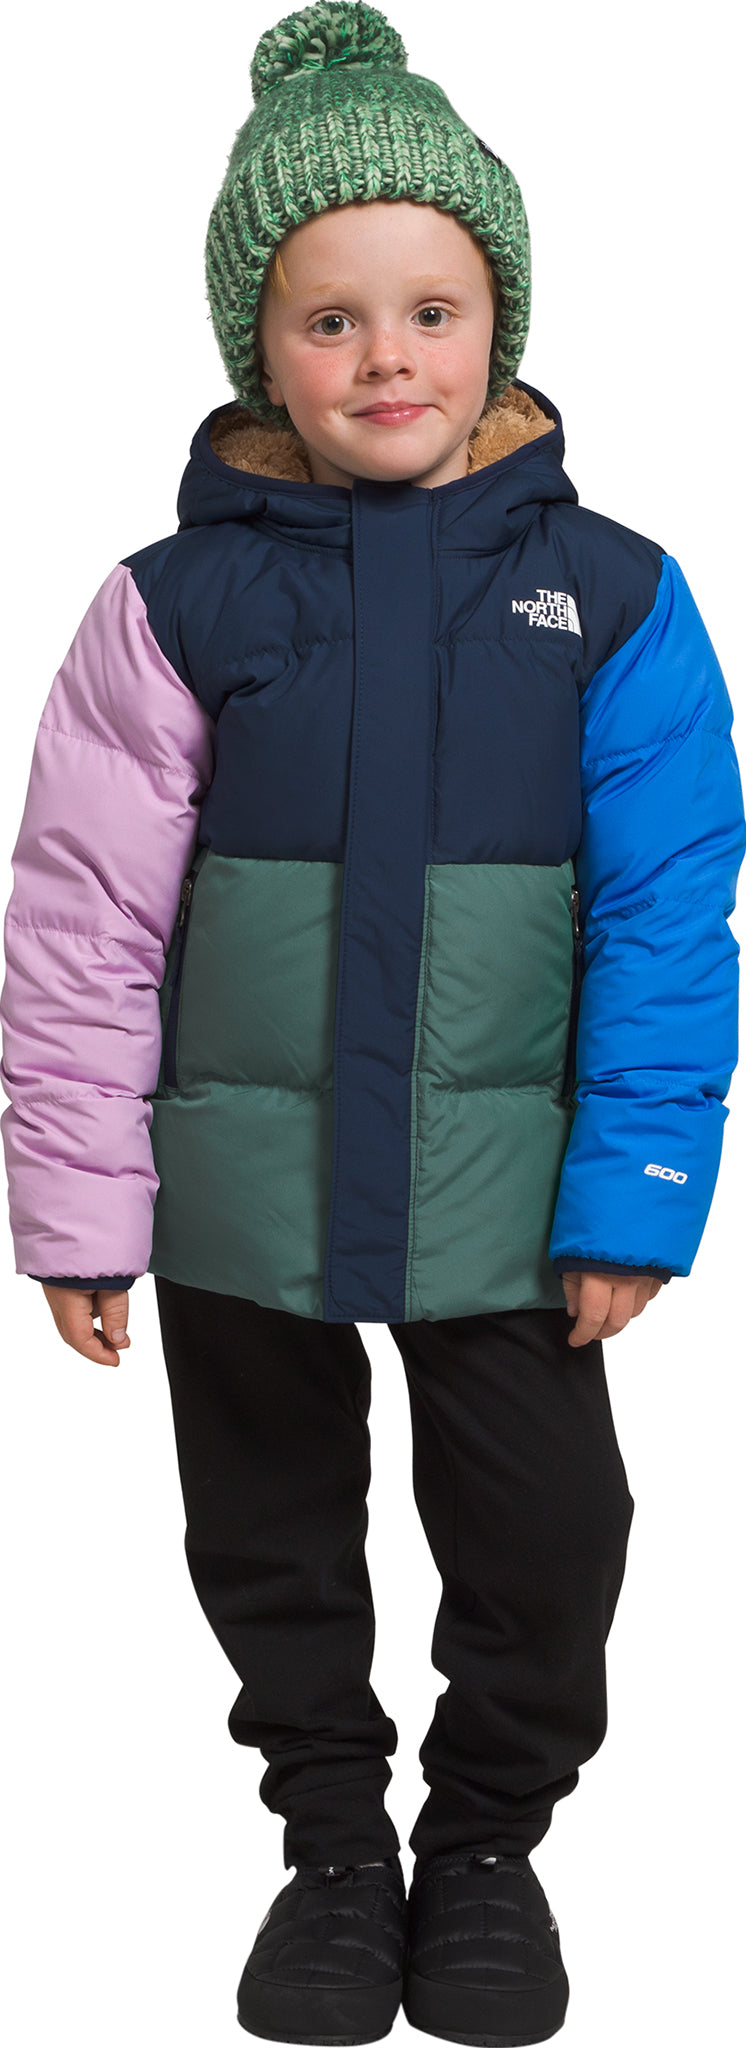 The North Face North Down Hooded Jacket - Kids | Altitude Sports